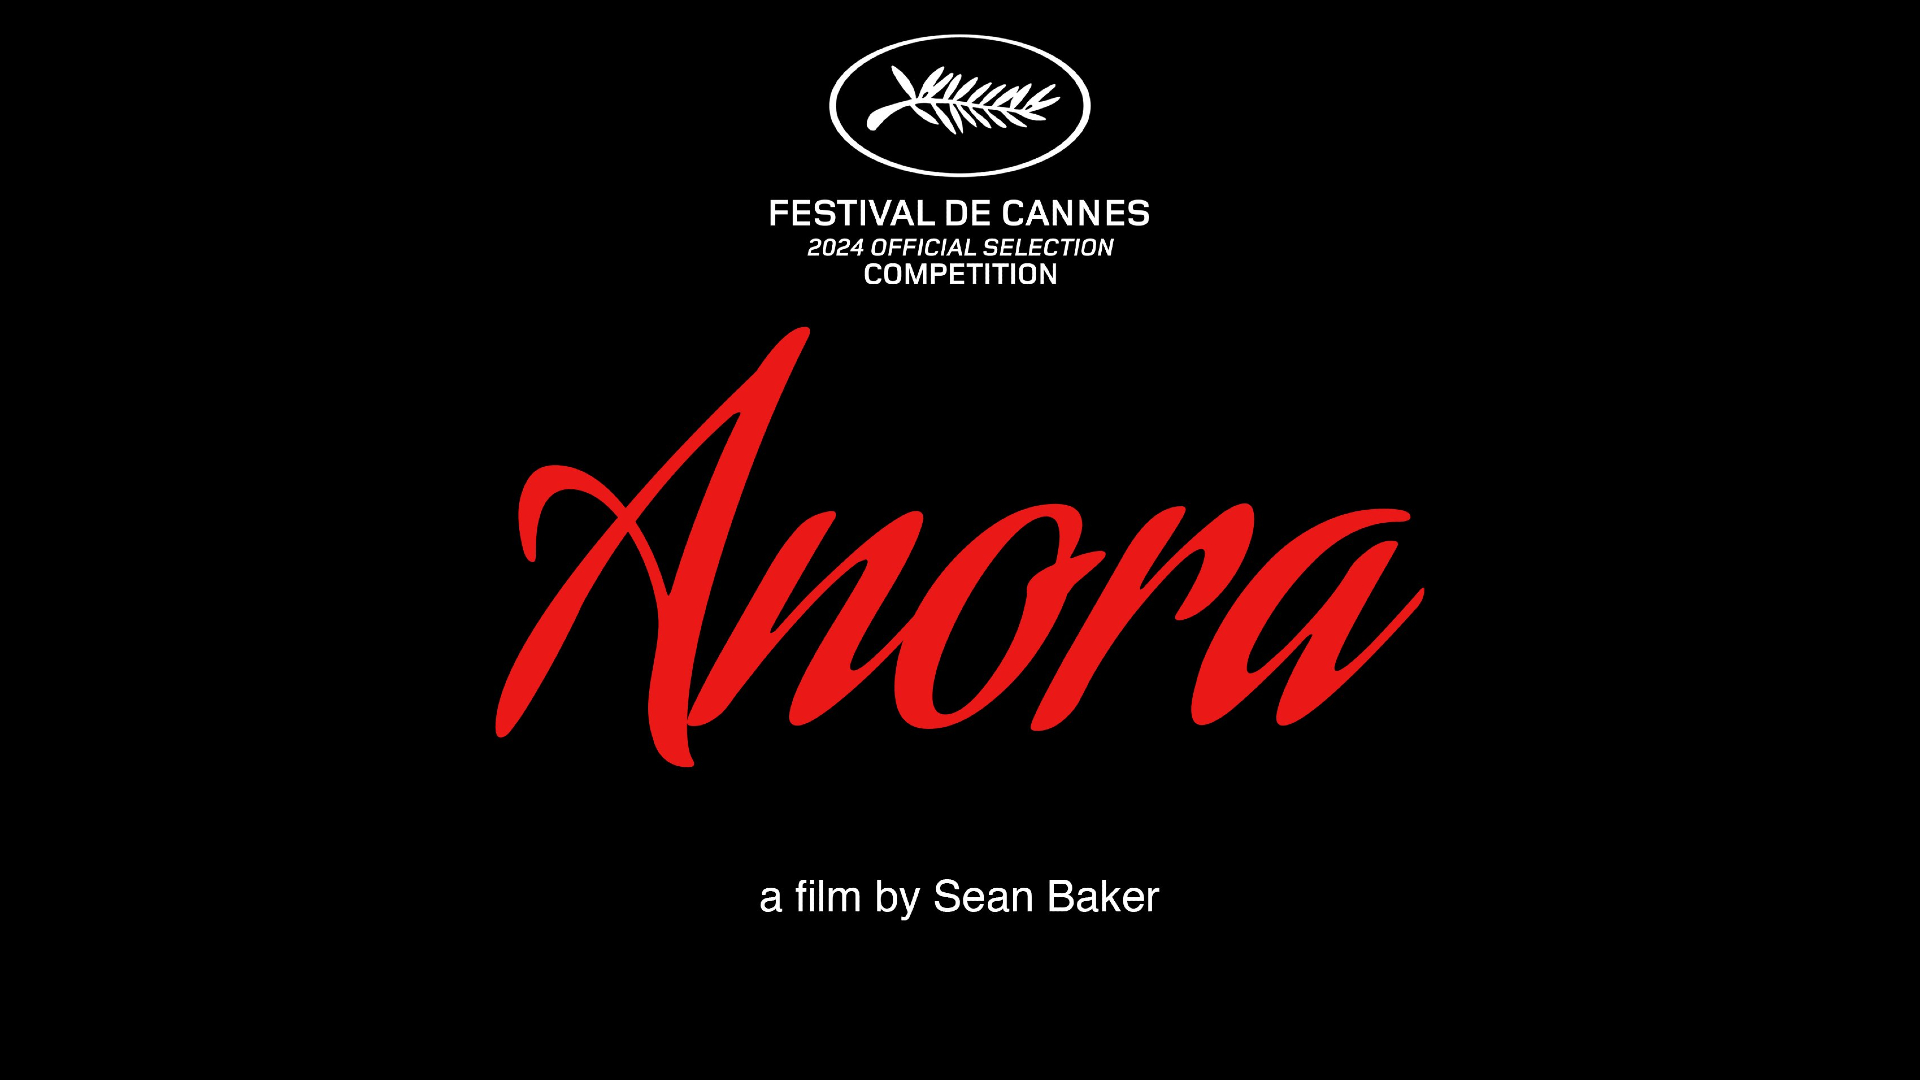 Sean Baker’s ‘Anora’ Debuts To Rave Reviews At Cannes